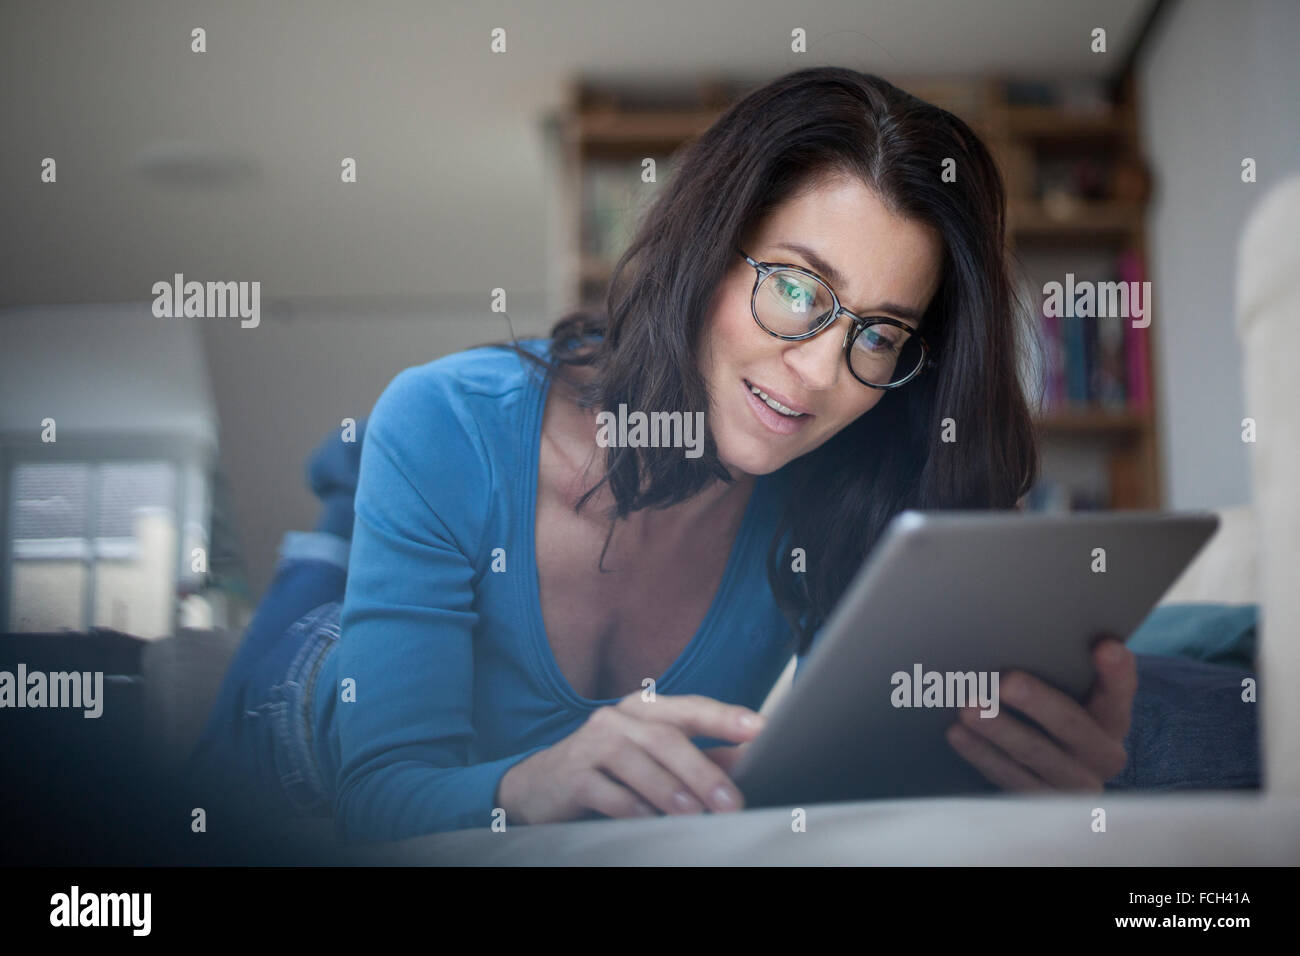 Woman at home using digital tablet Banque D'Images